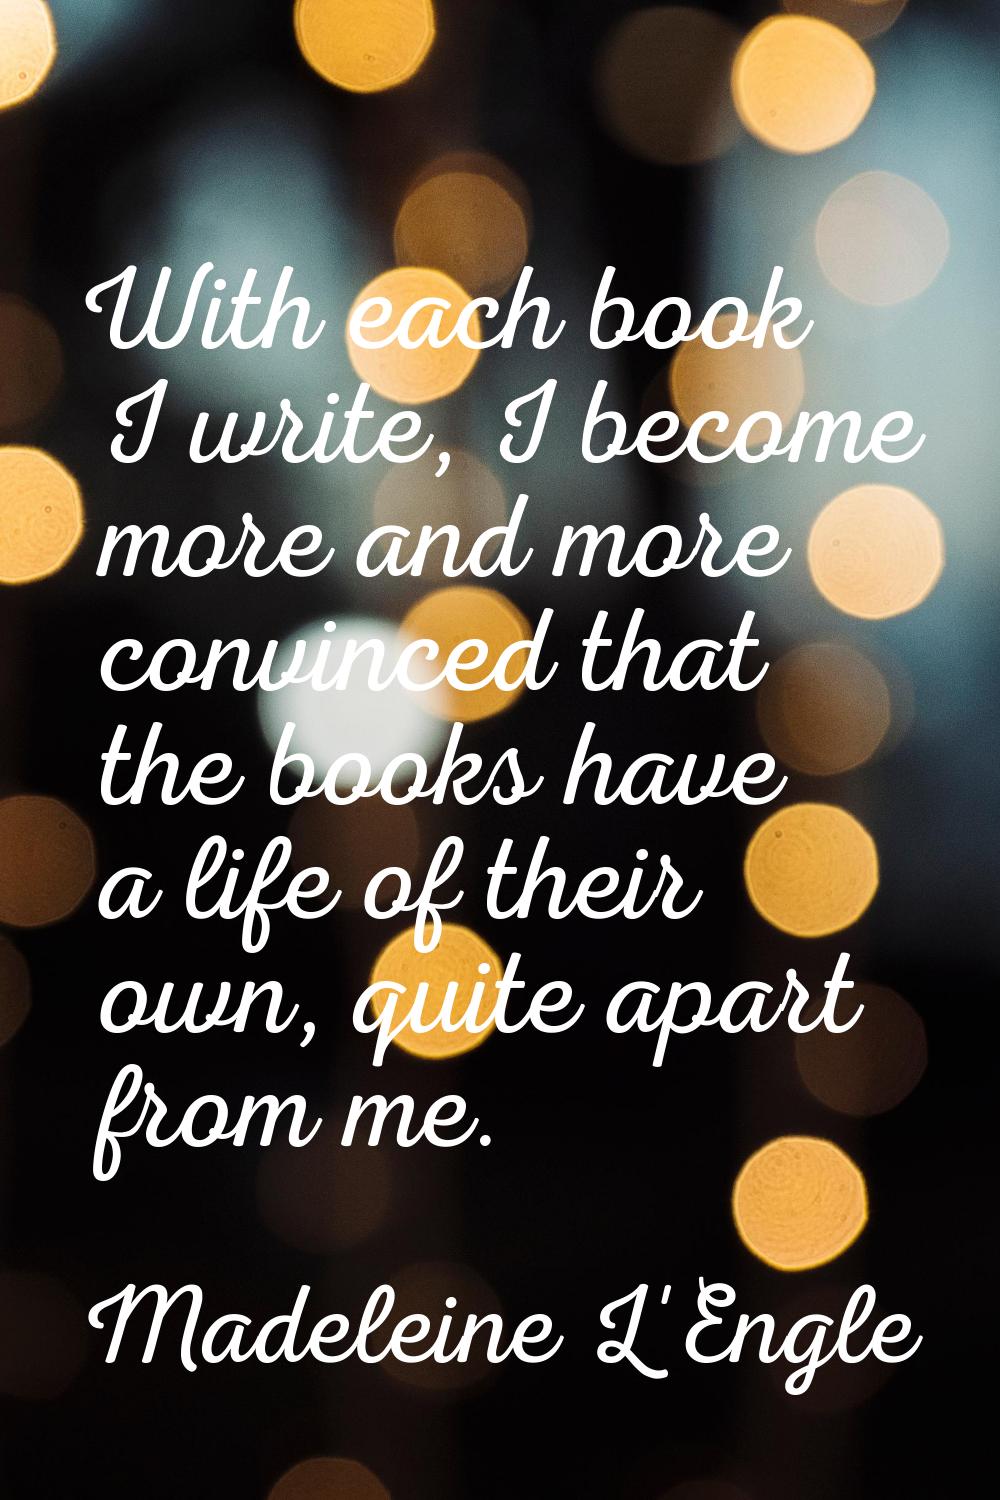 With each book I write, I become more and more convinced that the books have a life of their own, q